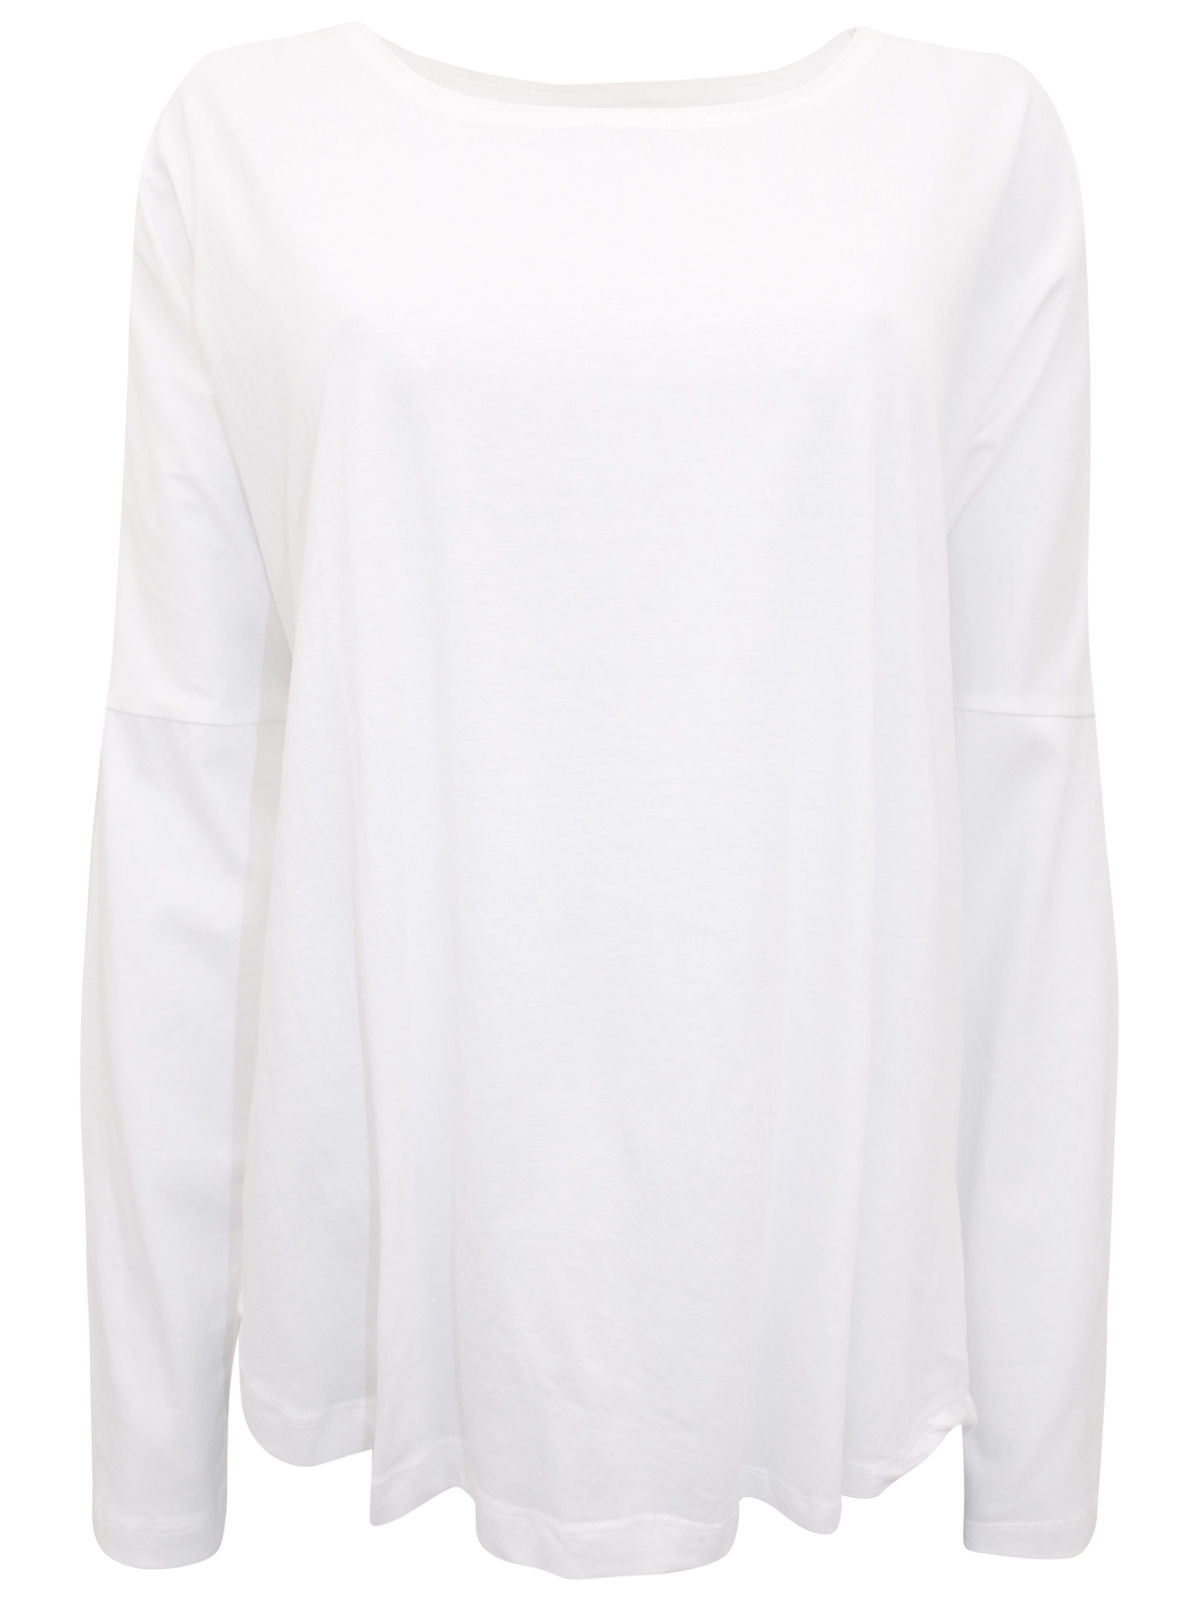 Cloth & Co - - Cloth&Co WHITE Organic Cotton Long Sleeve Top - Size 10 ...